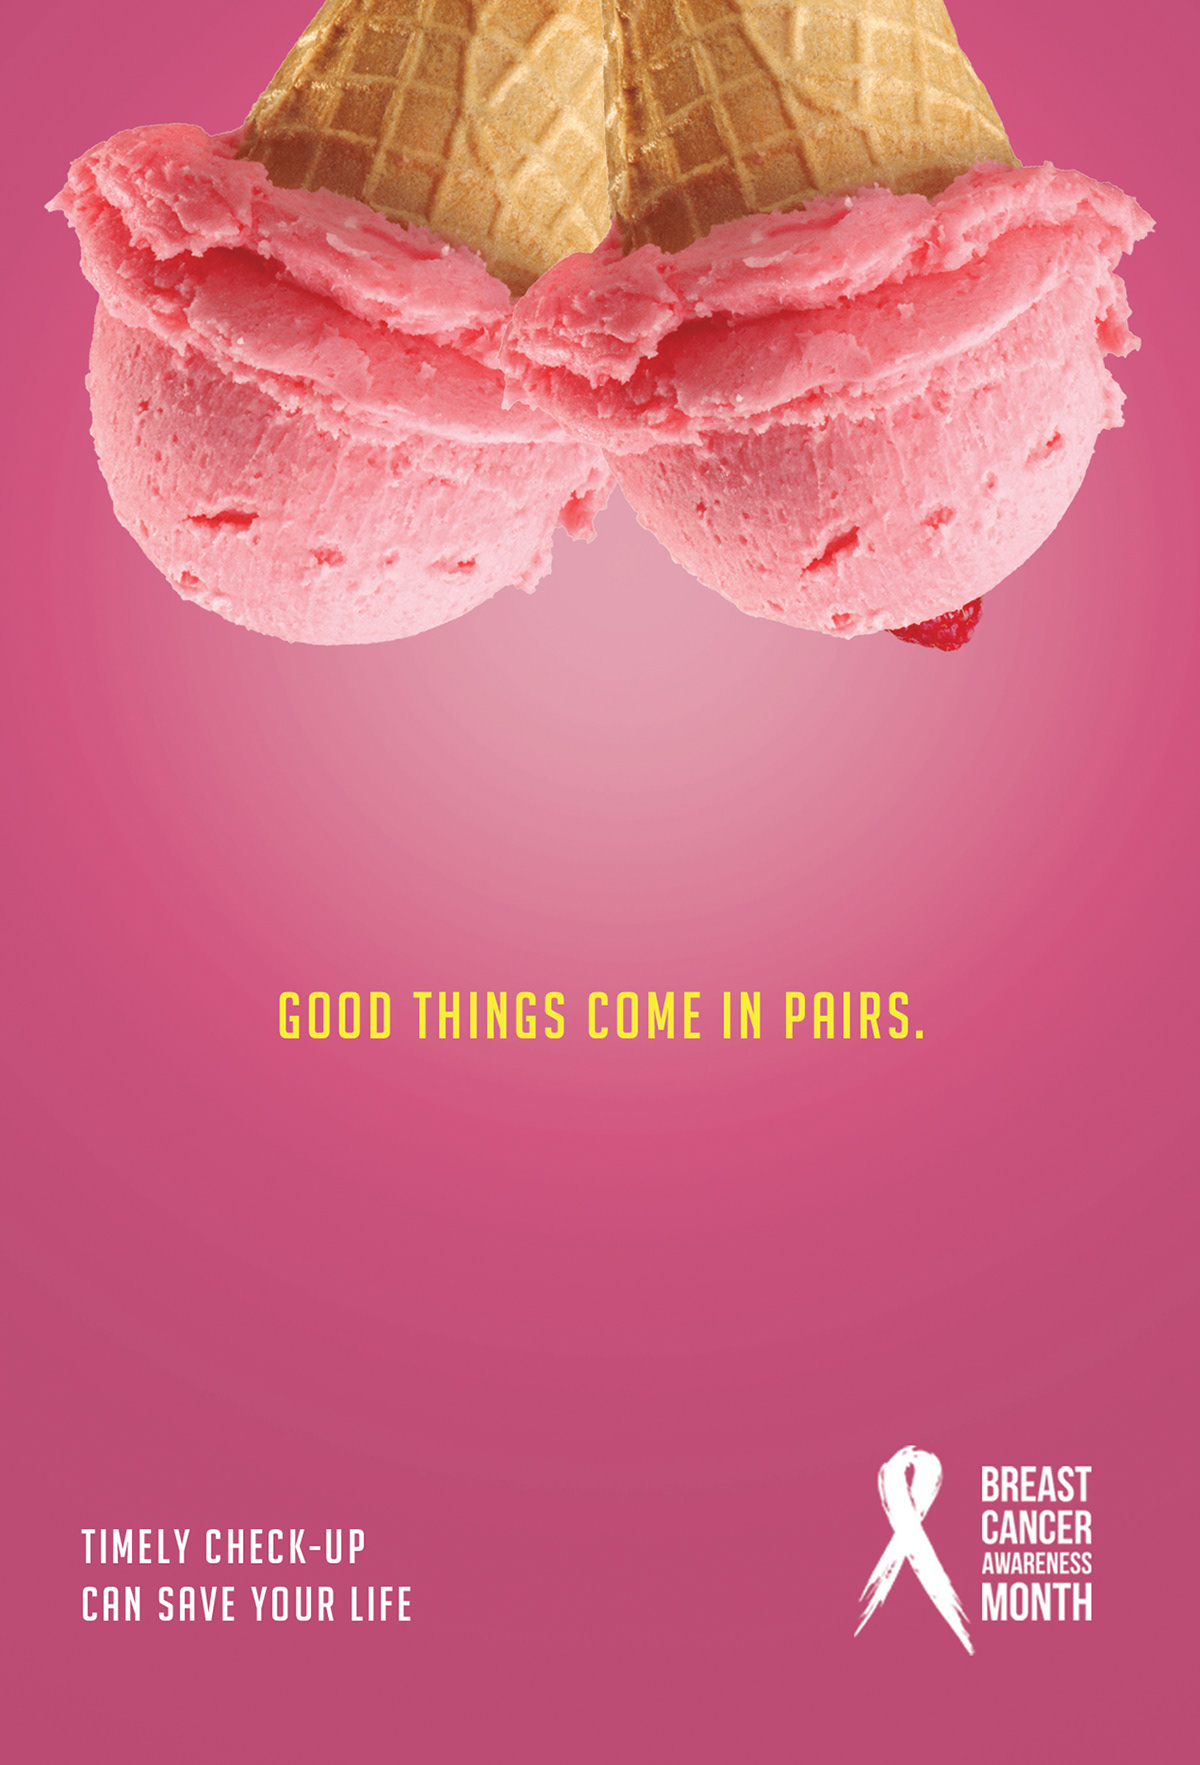 Breast Cancer Poster